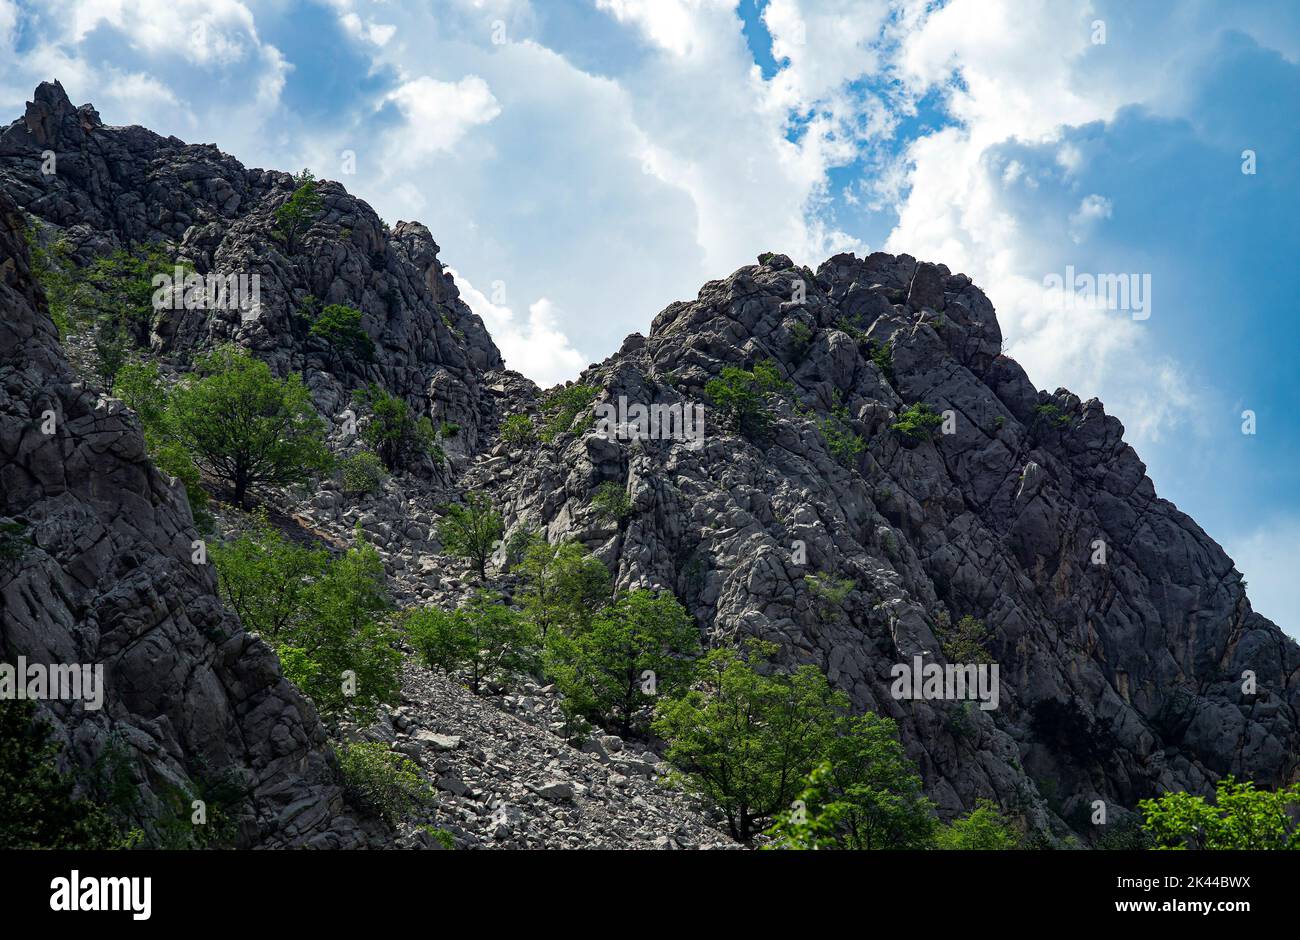 Rocky mountain landscape with some vegetation, located in Paklenica Croatia. Stock Photo